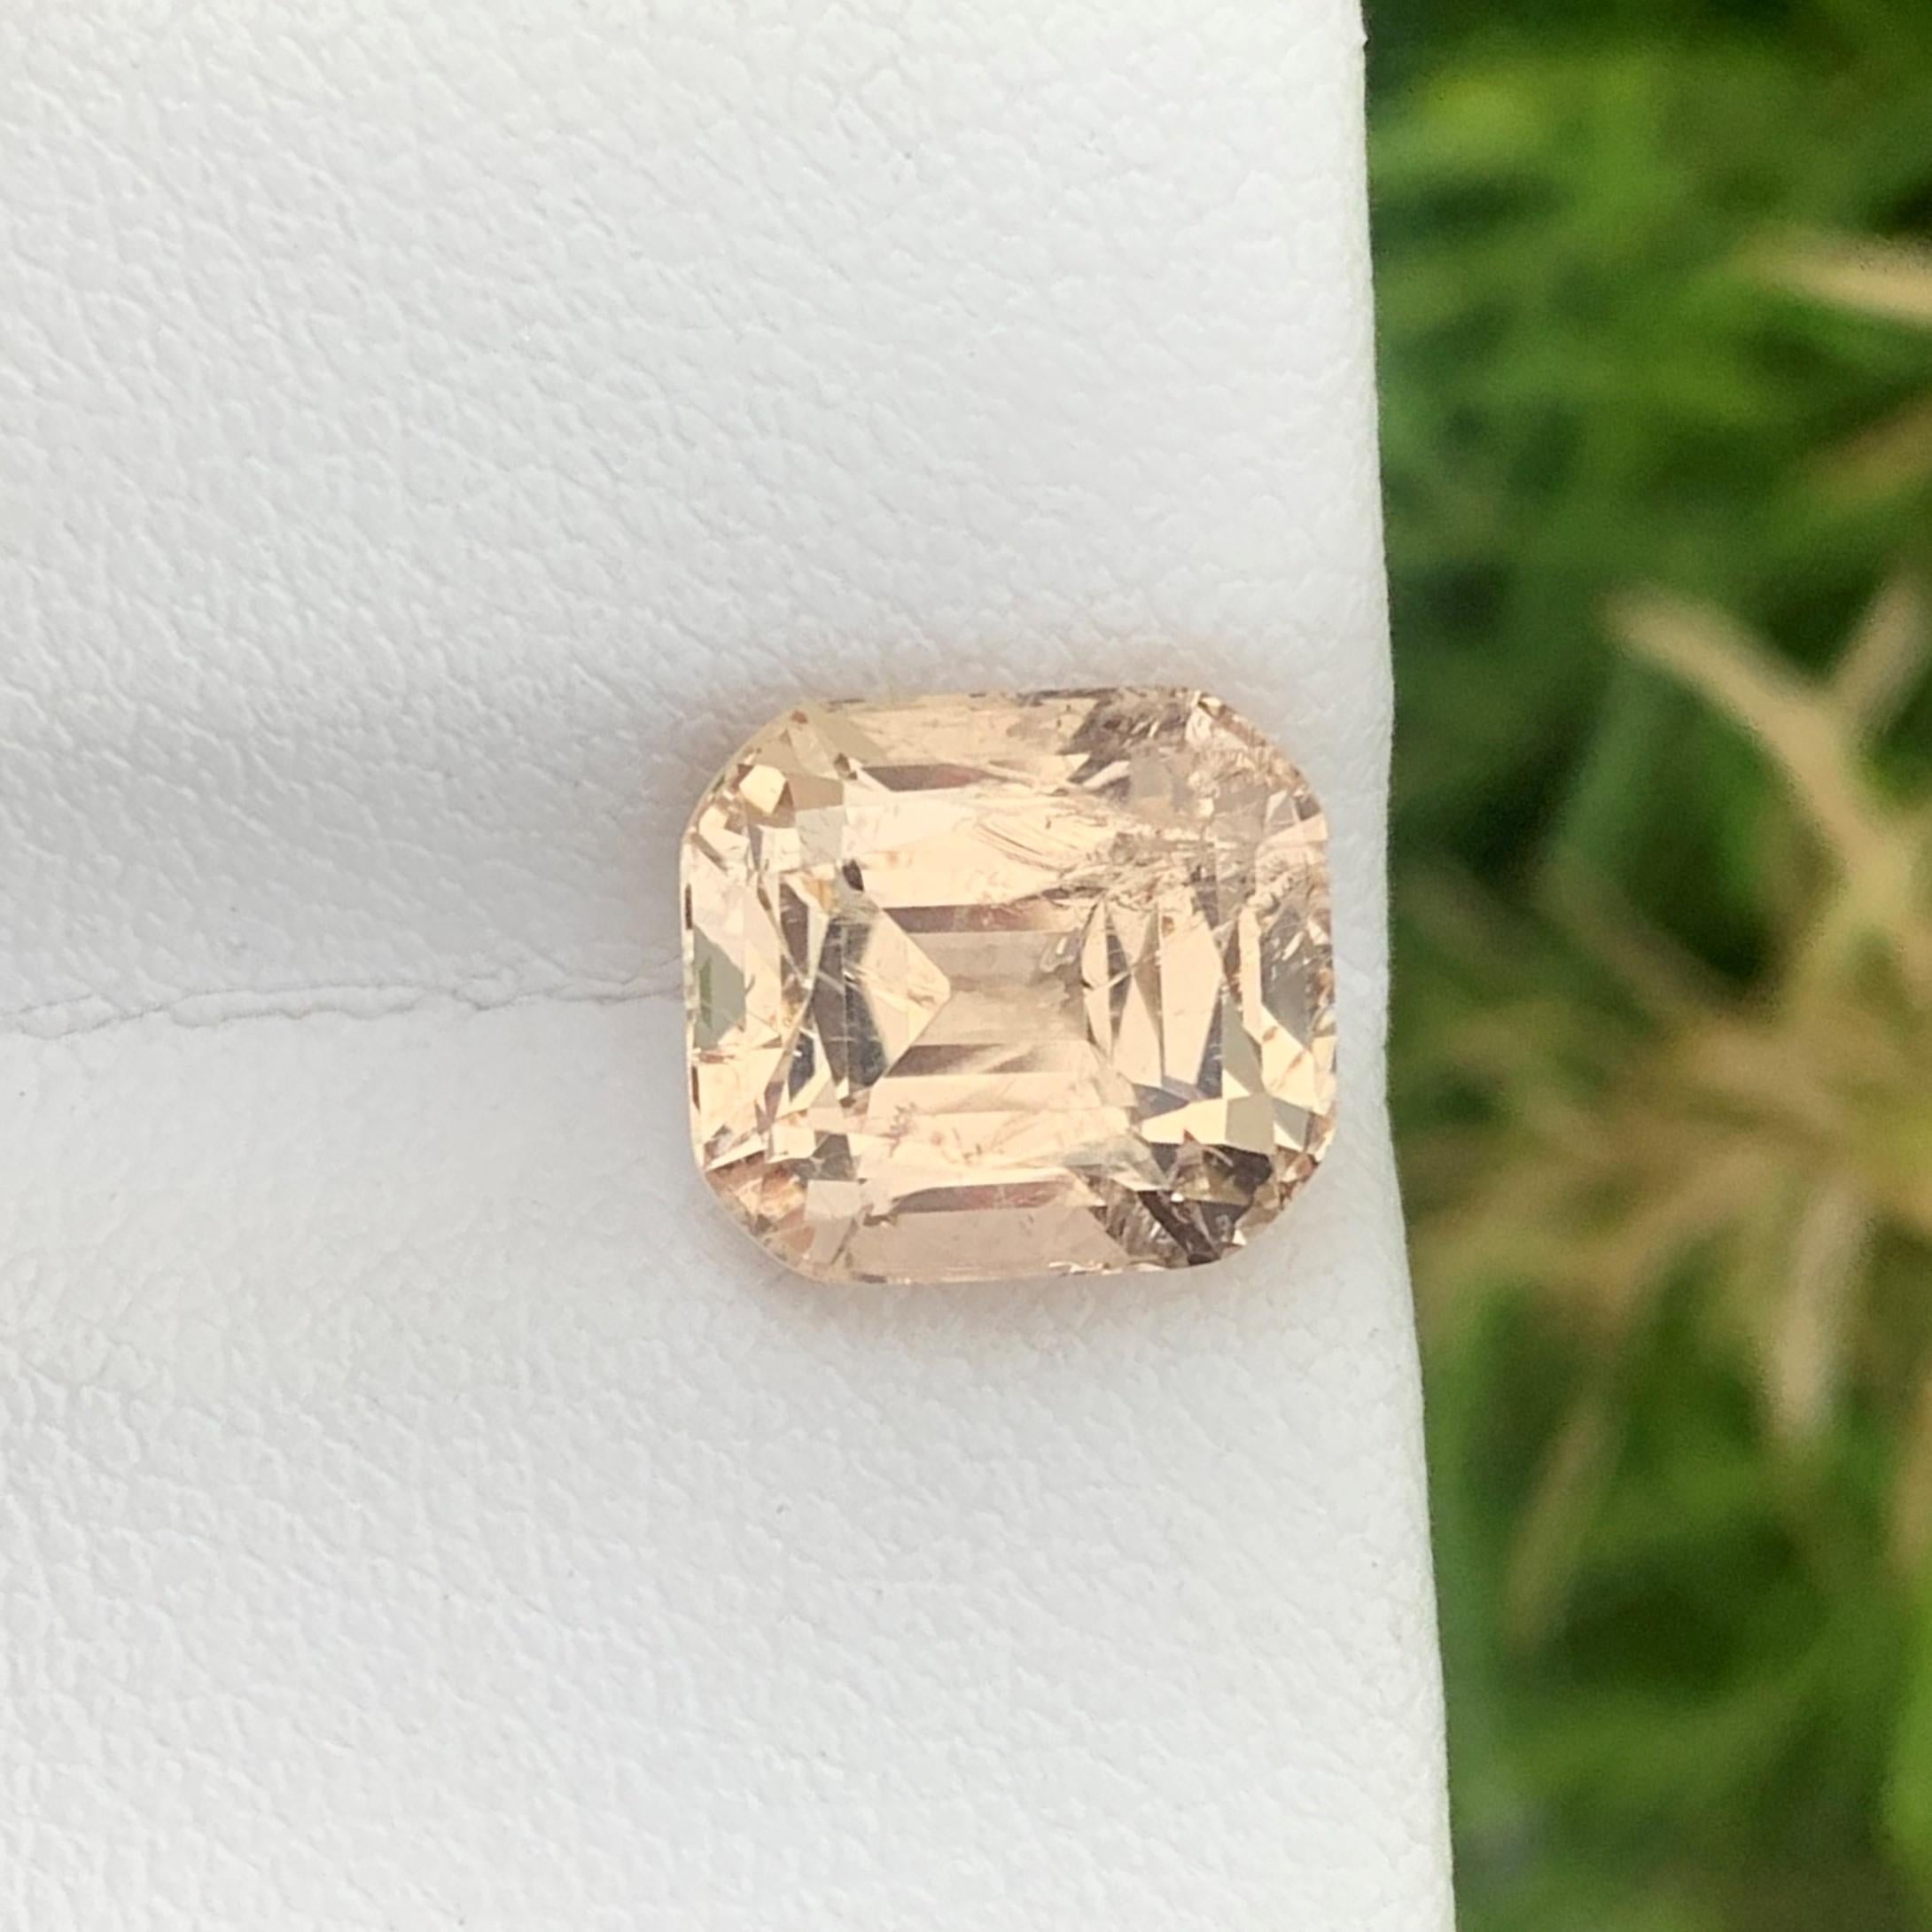 Faceted Imperial Topaz 
Weight: 5.20 Carats
Dimension: 9.7x8.7x7 Mm
Origin: Katlang Pakistan 
Shape: Cushion
Color; Peach Imperial 
Treatment: Non
Certificate: On Demand 
Imperial Topaz encourages healthy boundaries and helps us be attracted to the